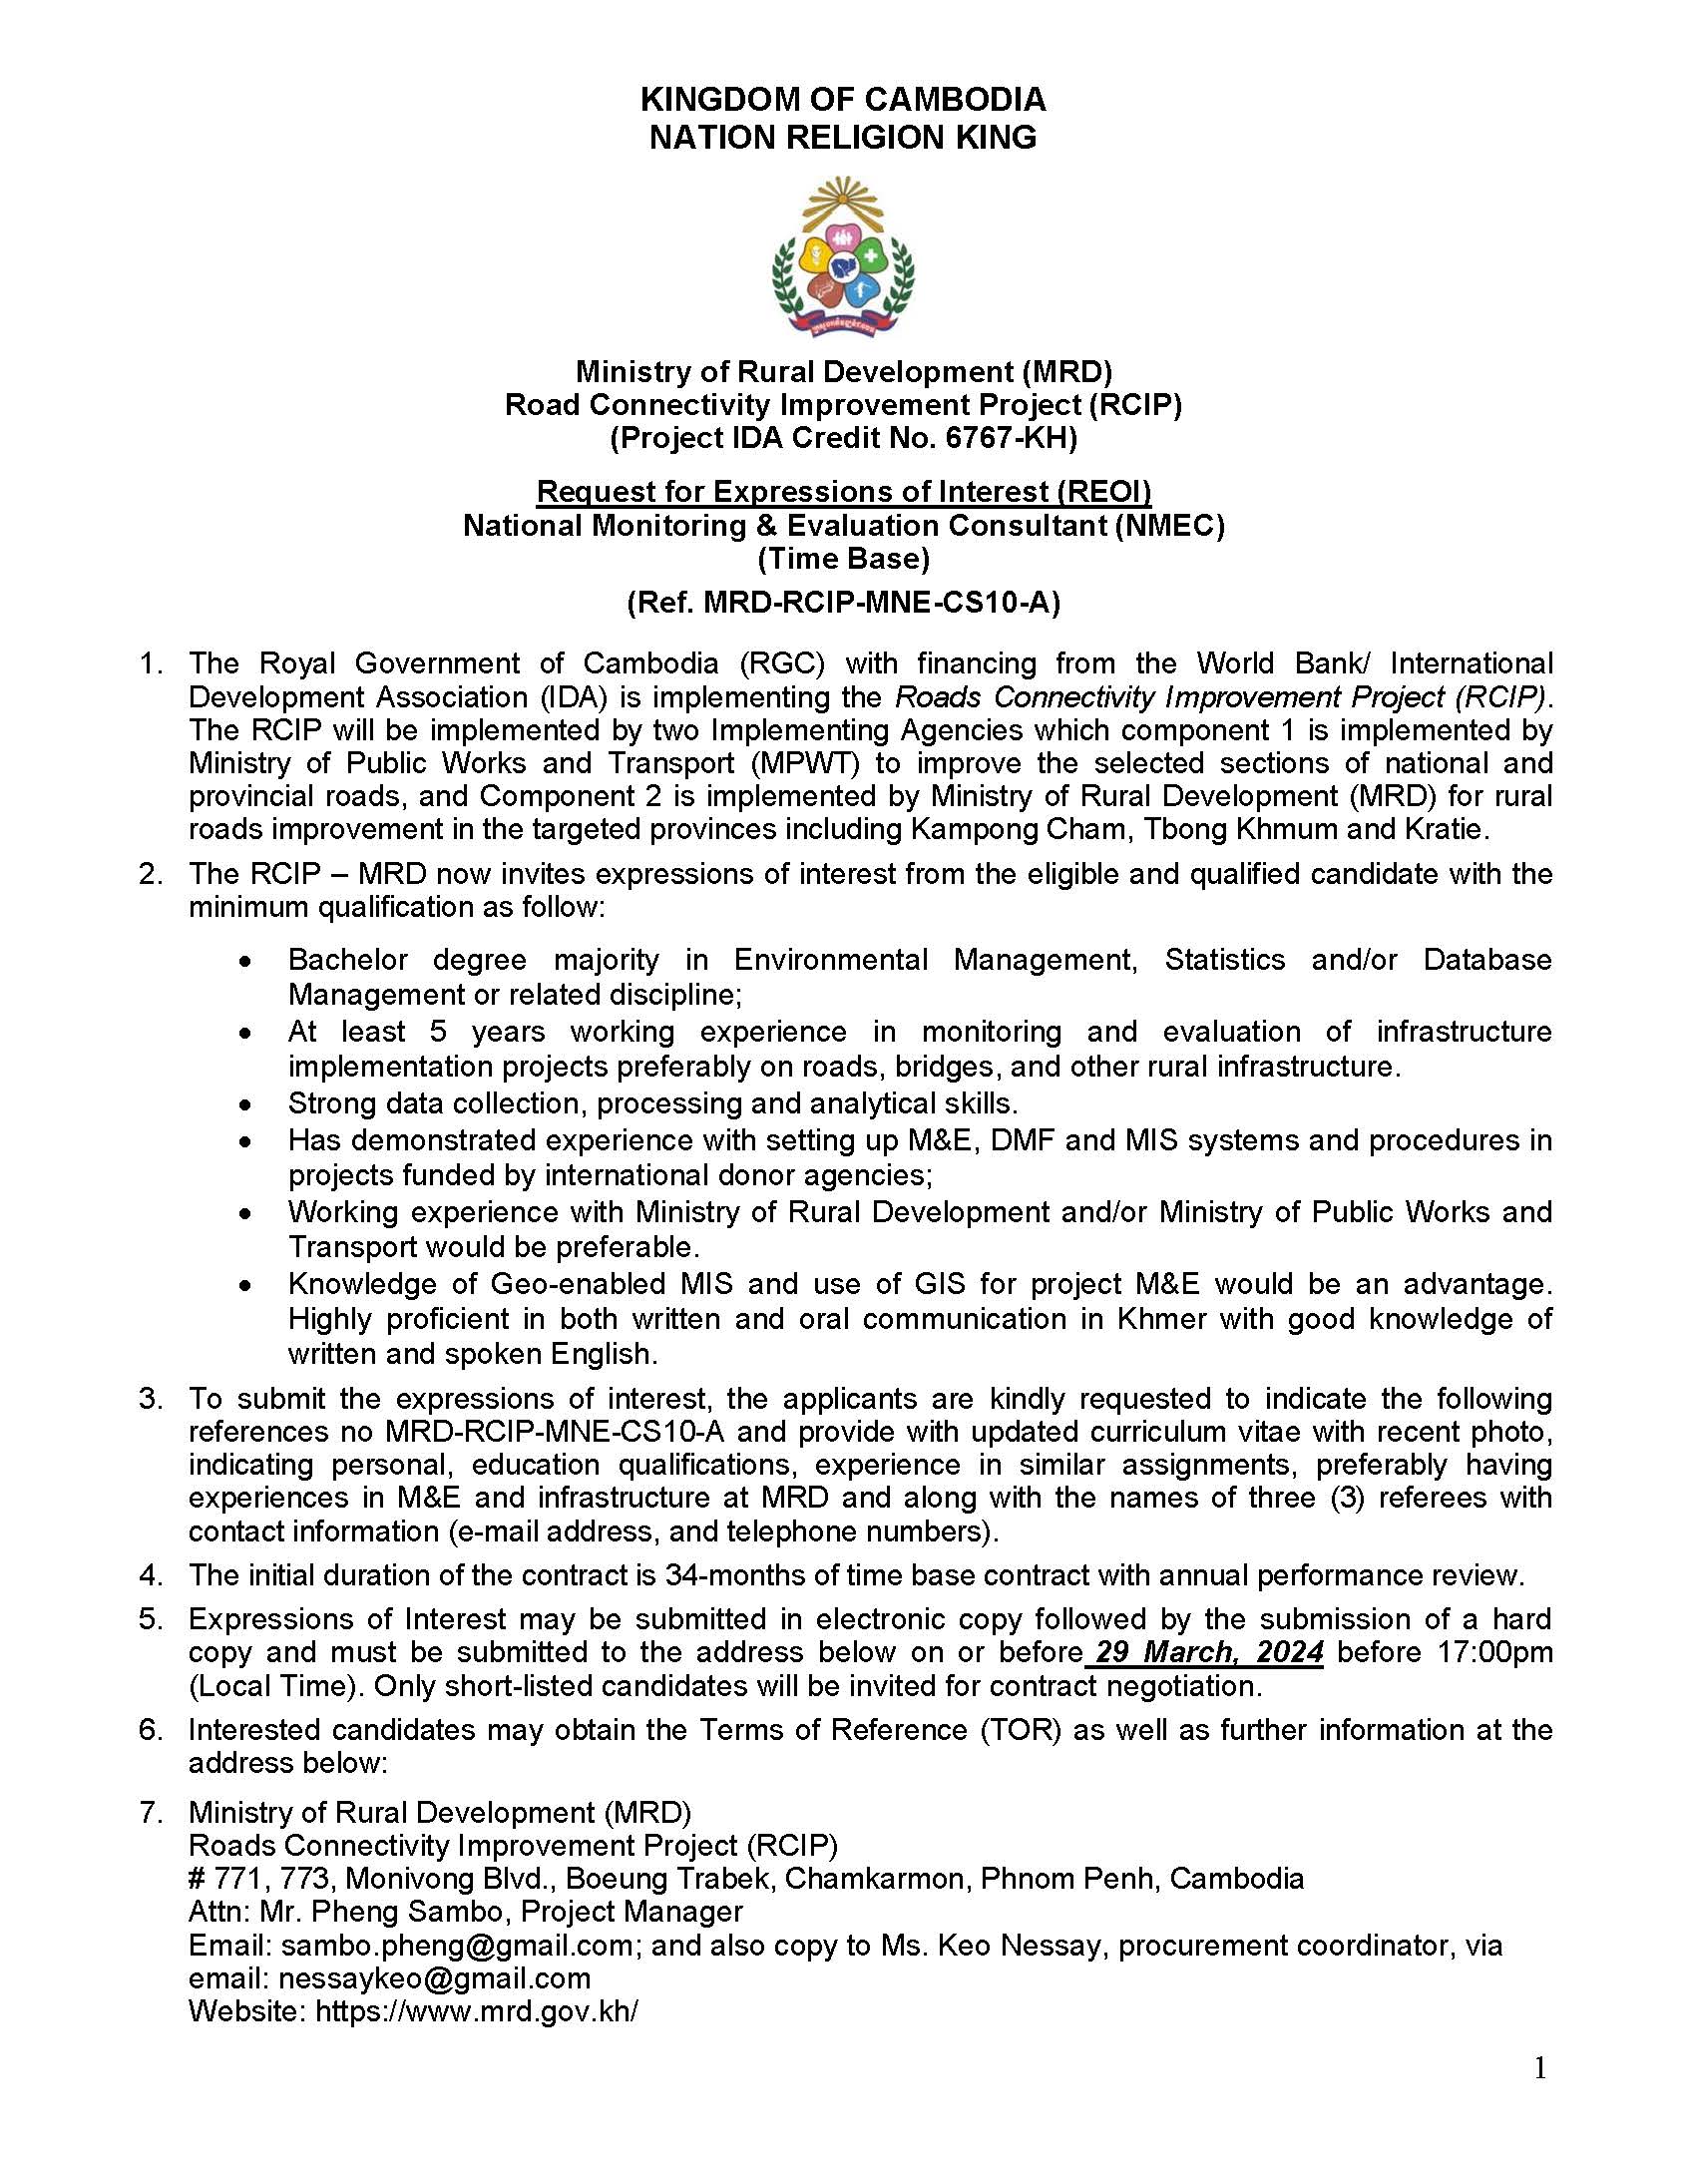 Request for Expressions of Interest (REOI) National Monitoring & Evaluation Consultant (NMEC)